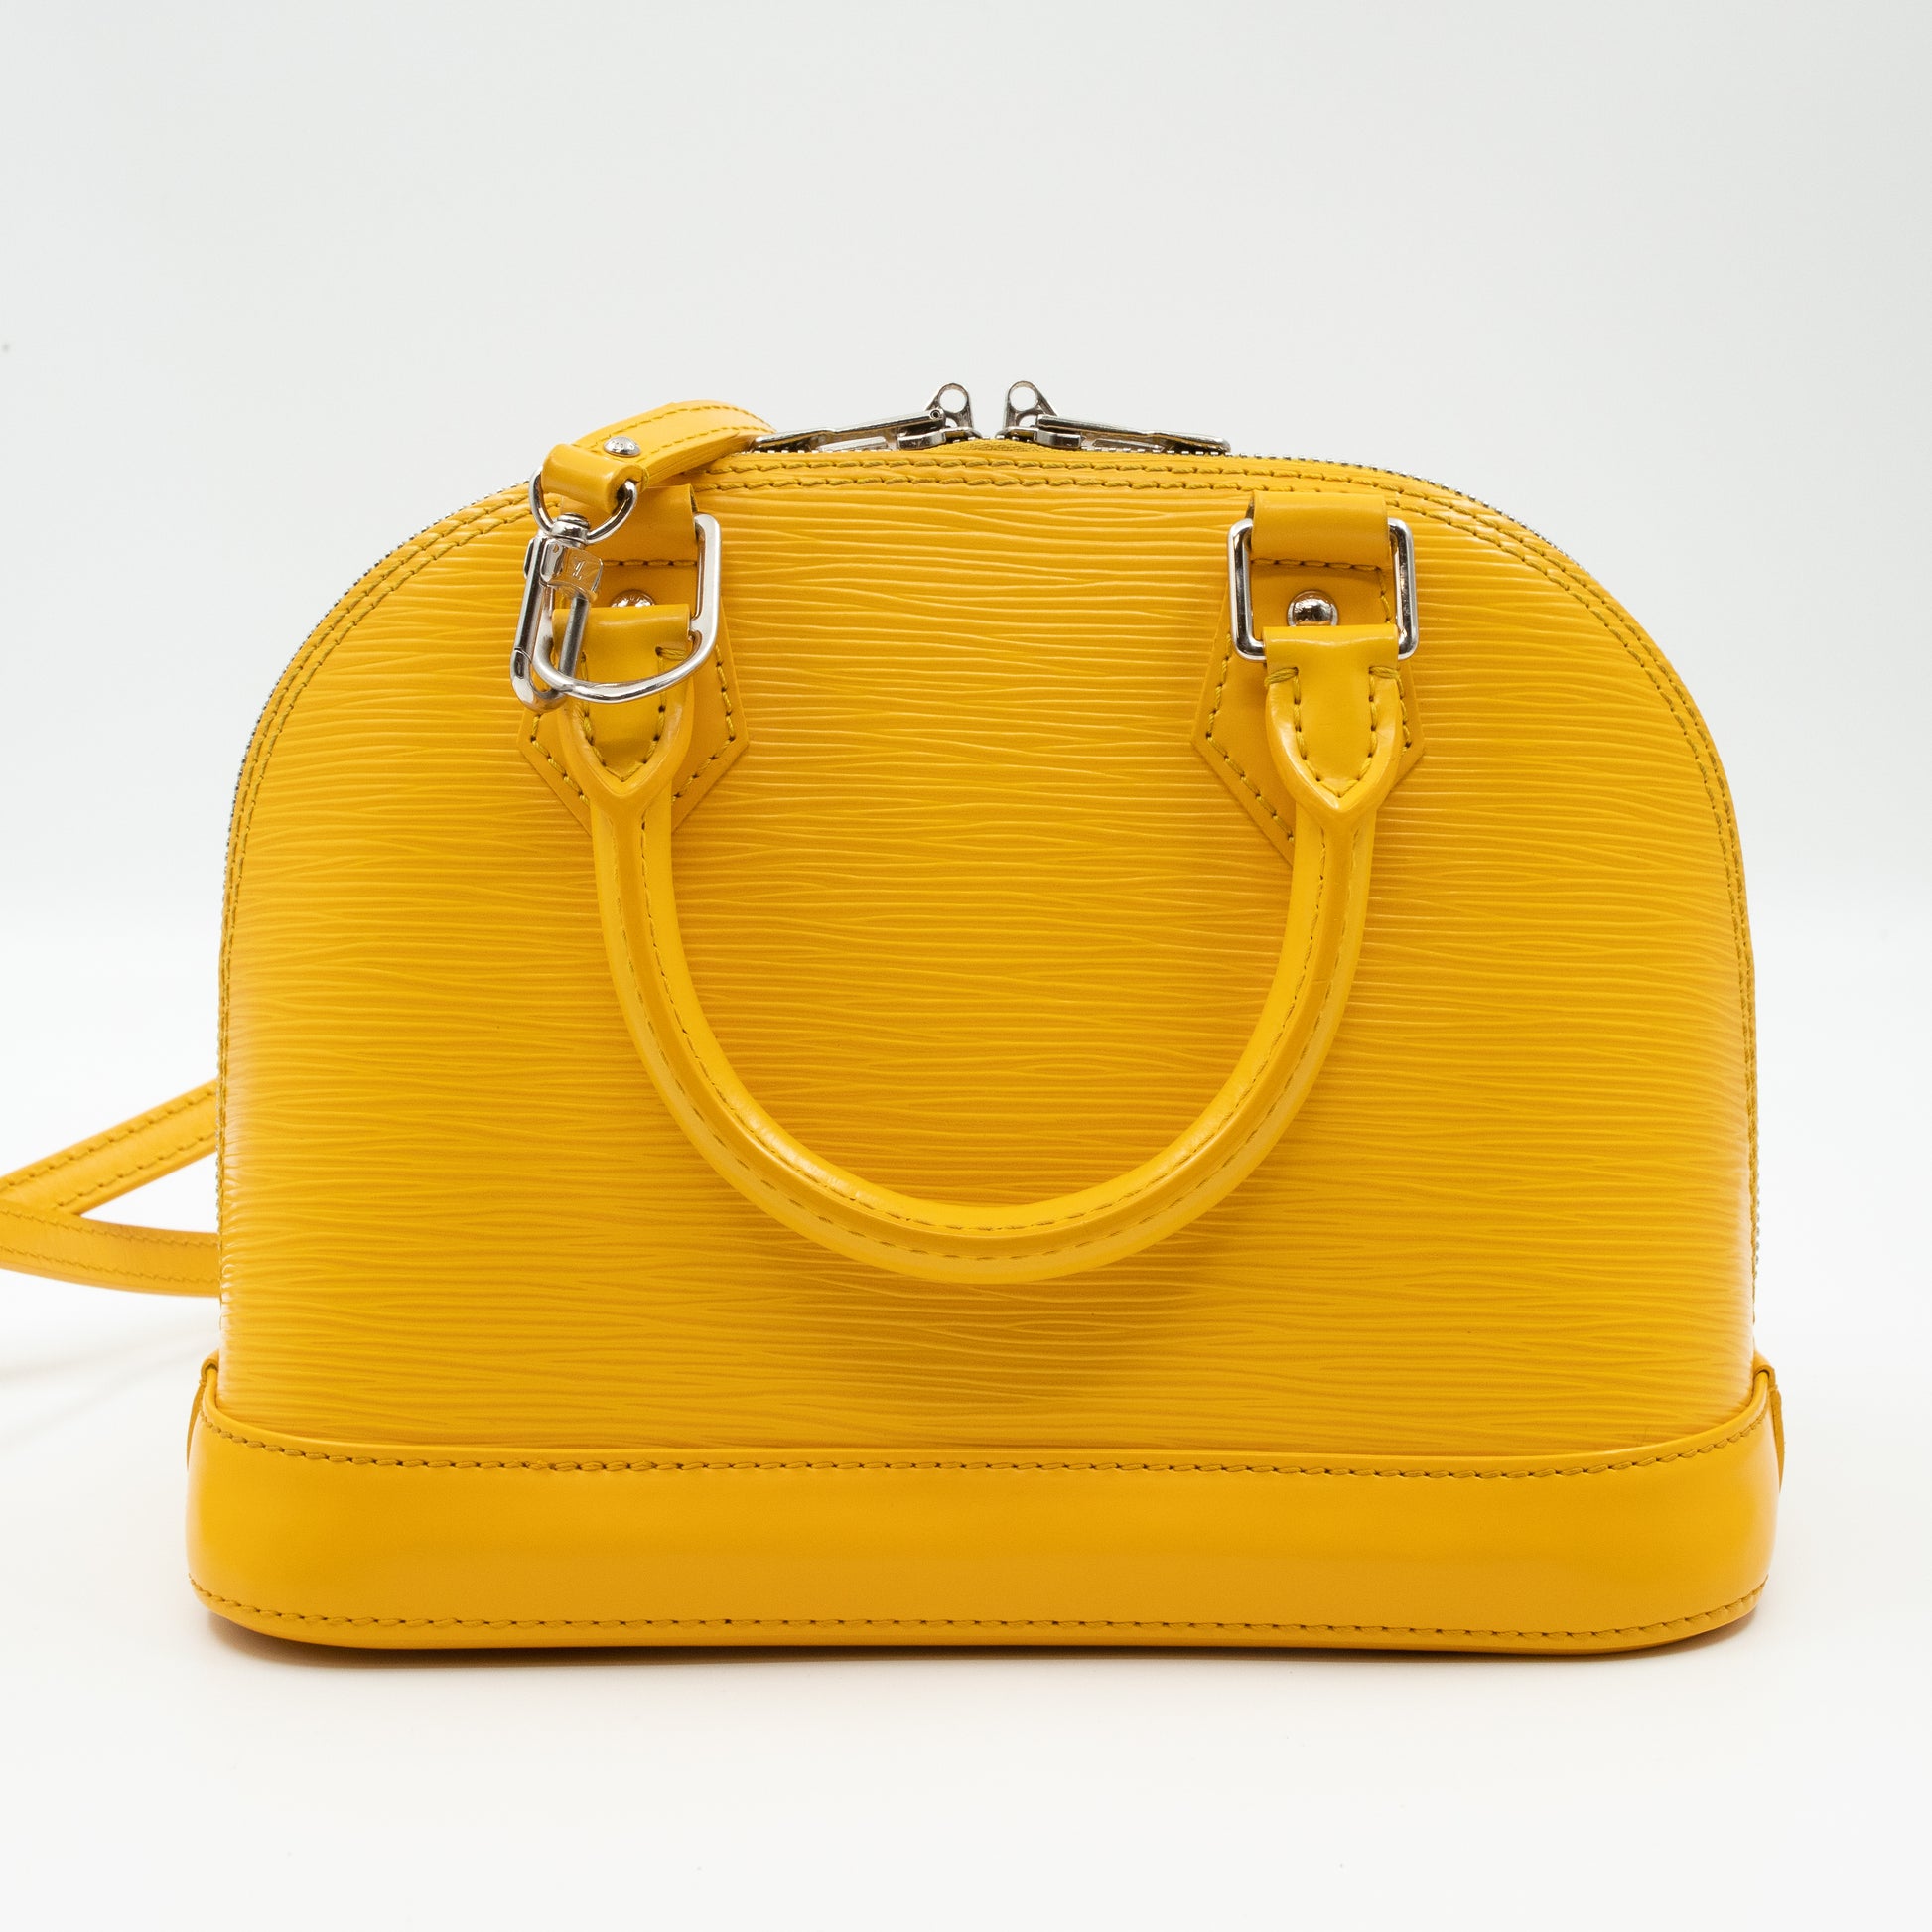 Sold at Auction: LOUIS VUITTON, A NOÉ BAG STYLED IN YELLOW EPI